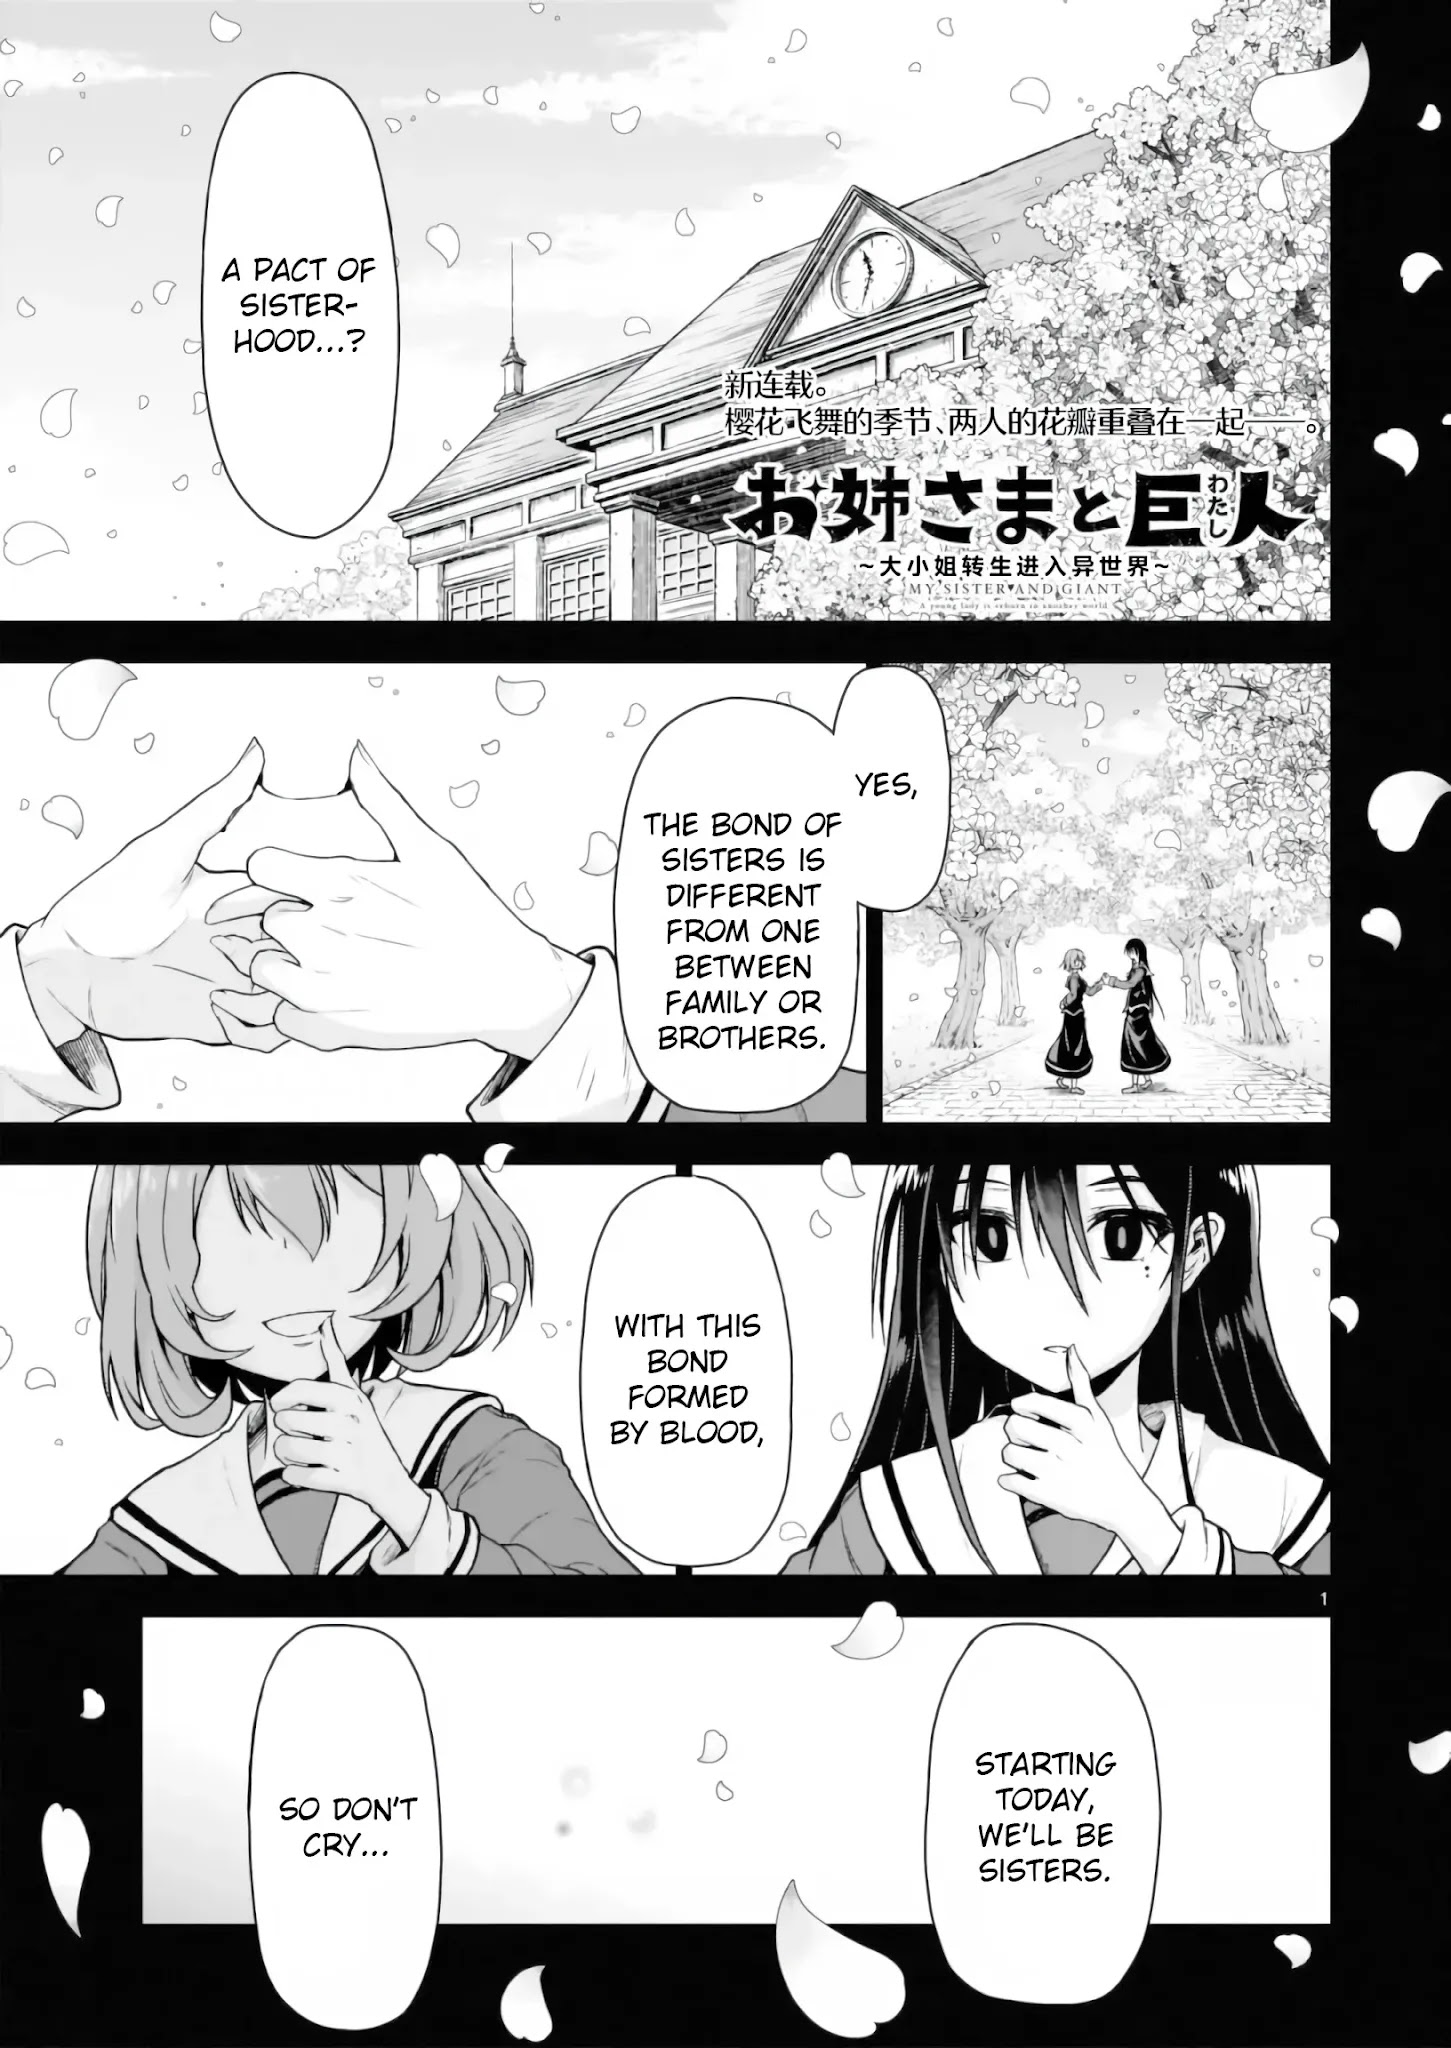 The Onee-Sama And The Giant - Page 2